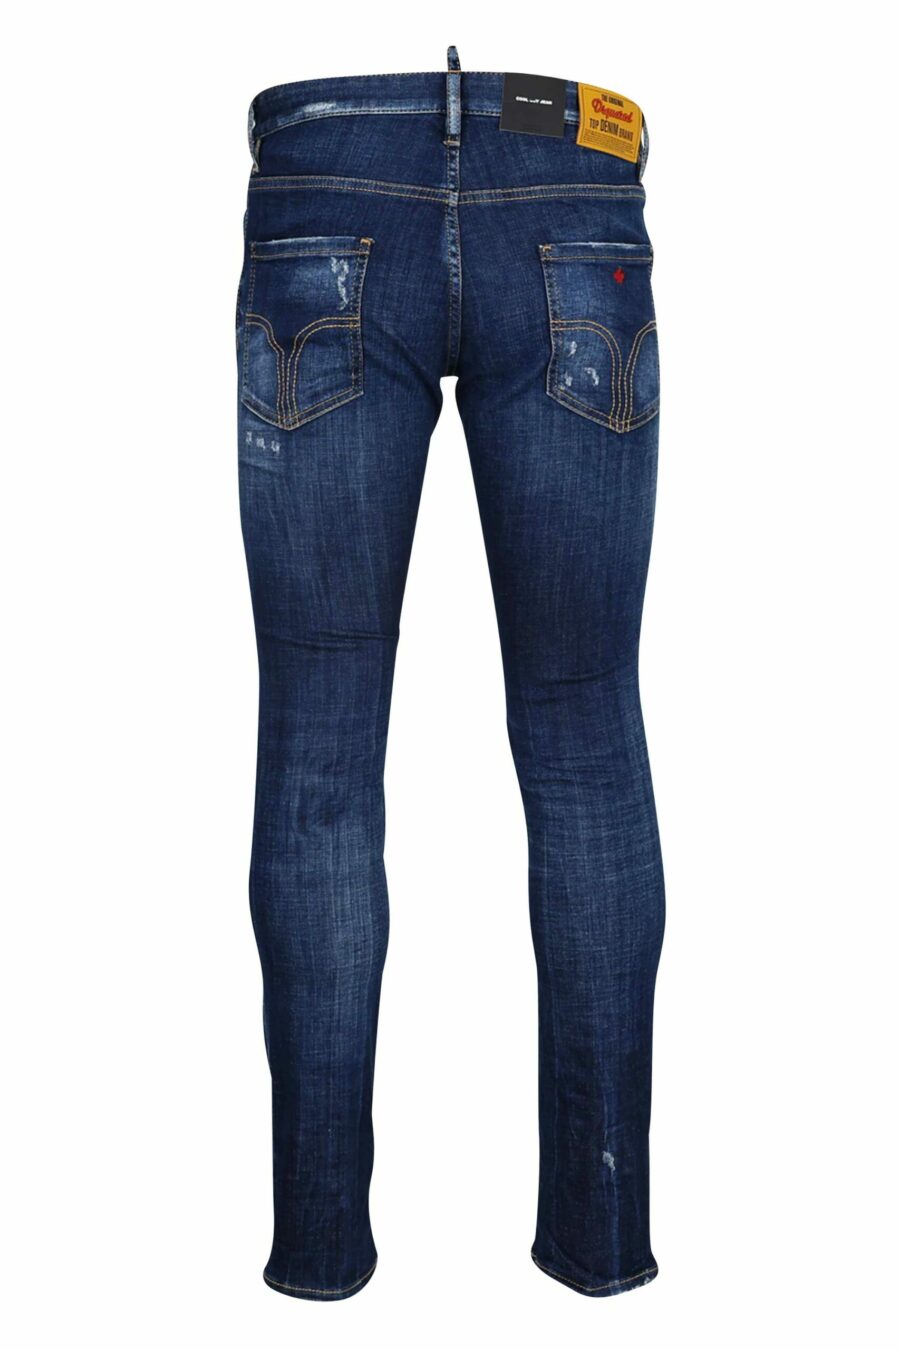 Blue "cool guy" jeans with wear and tear - 8054148102005 2 scaled